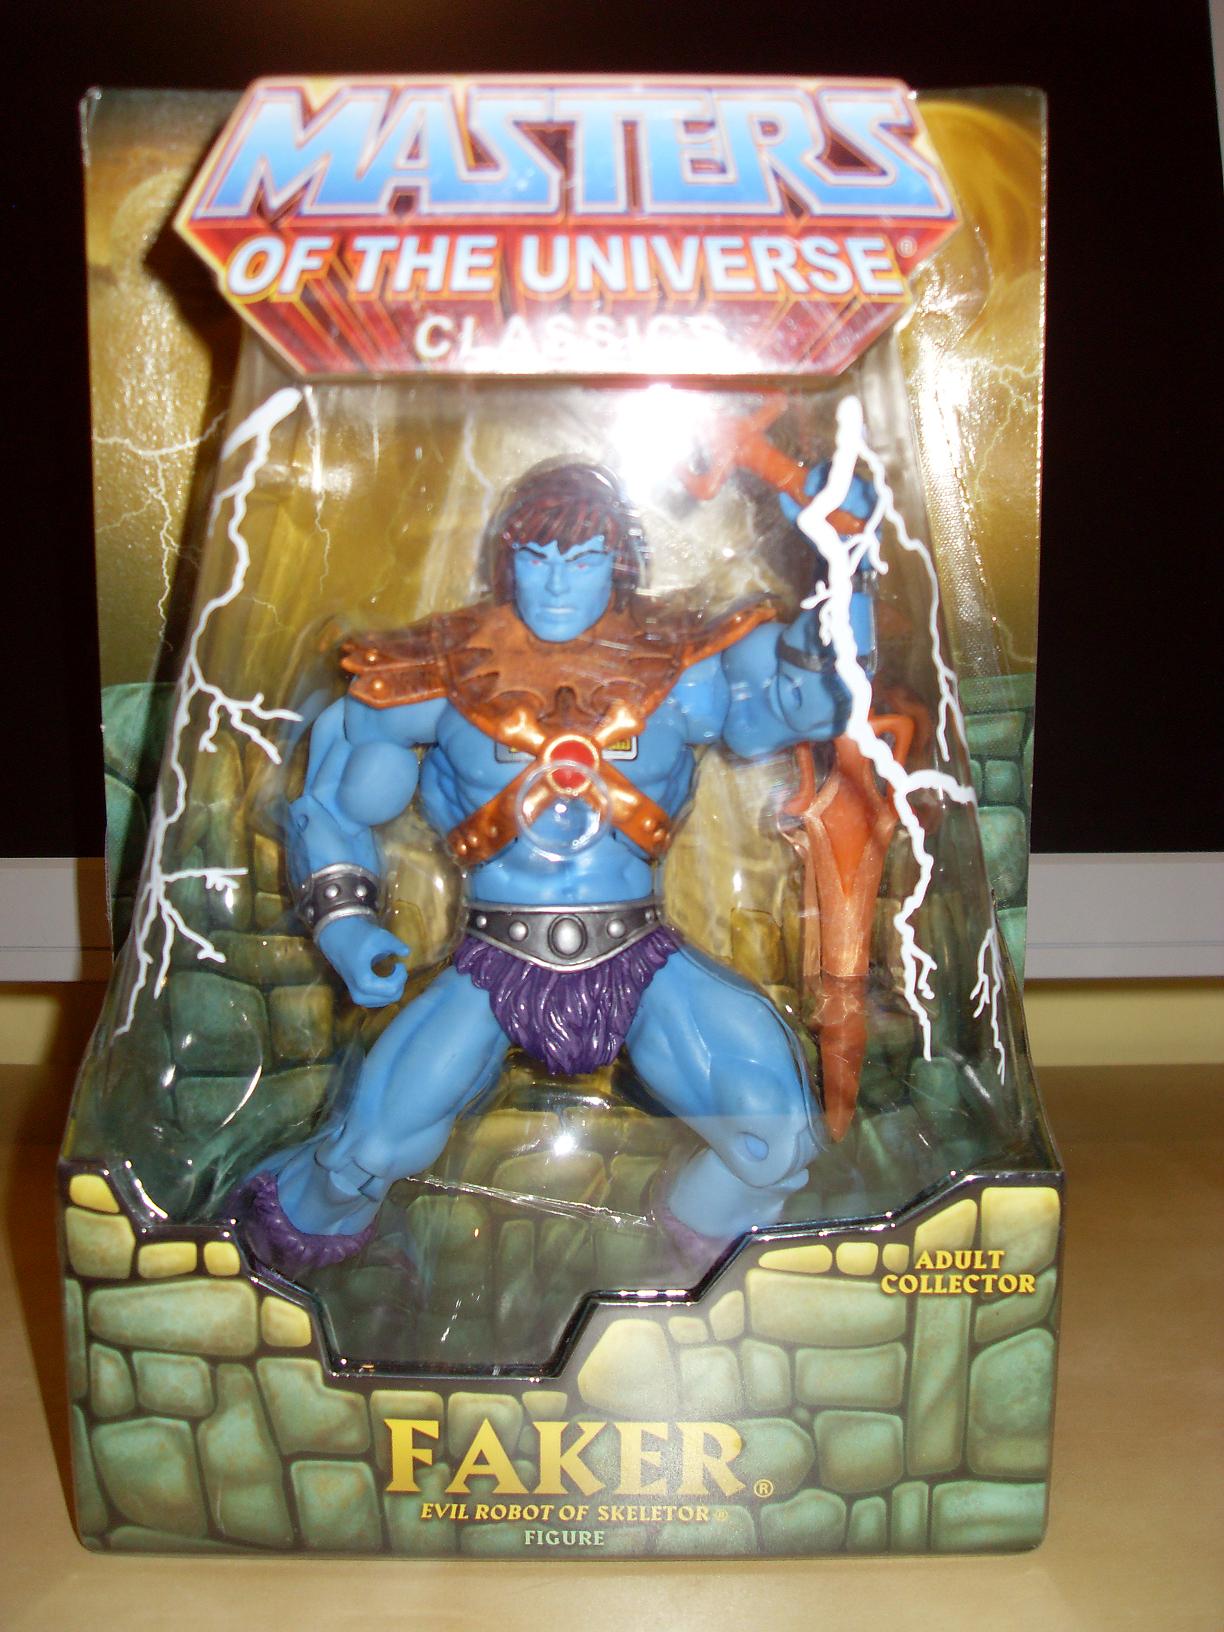 LORD HE-MAN Colecction 7981